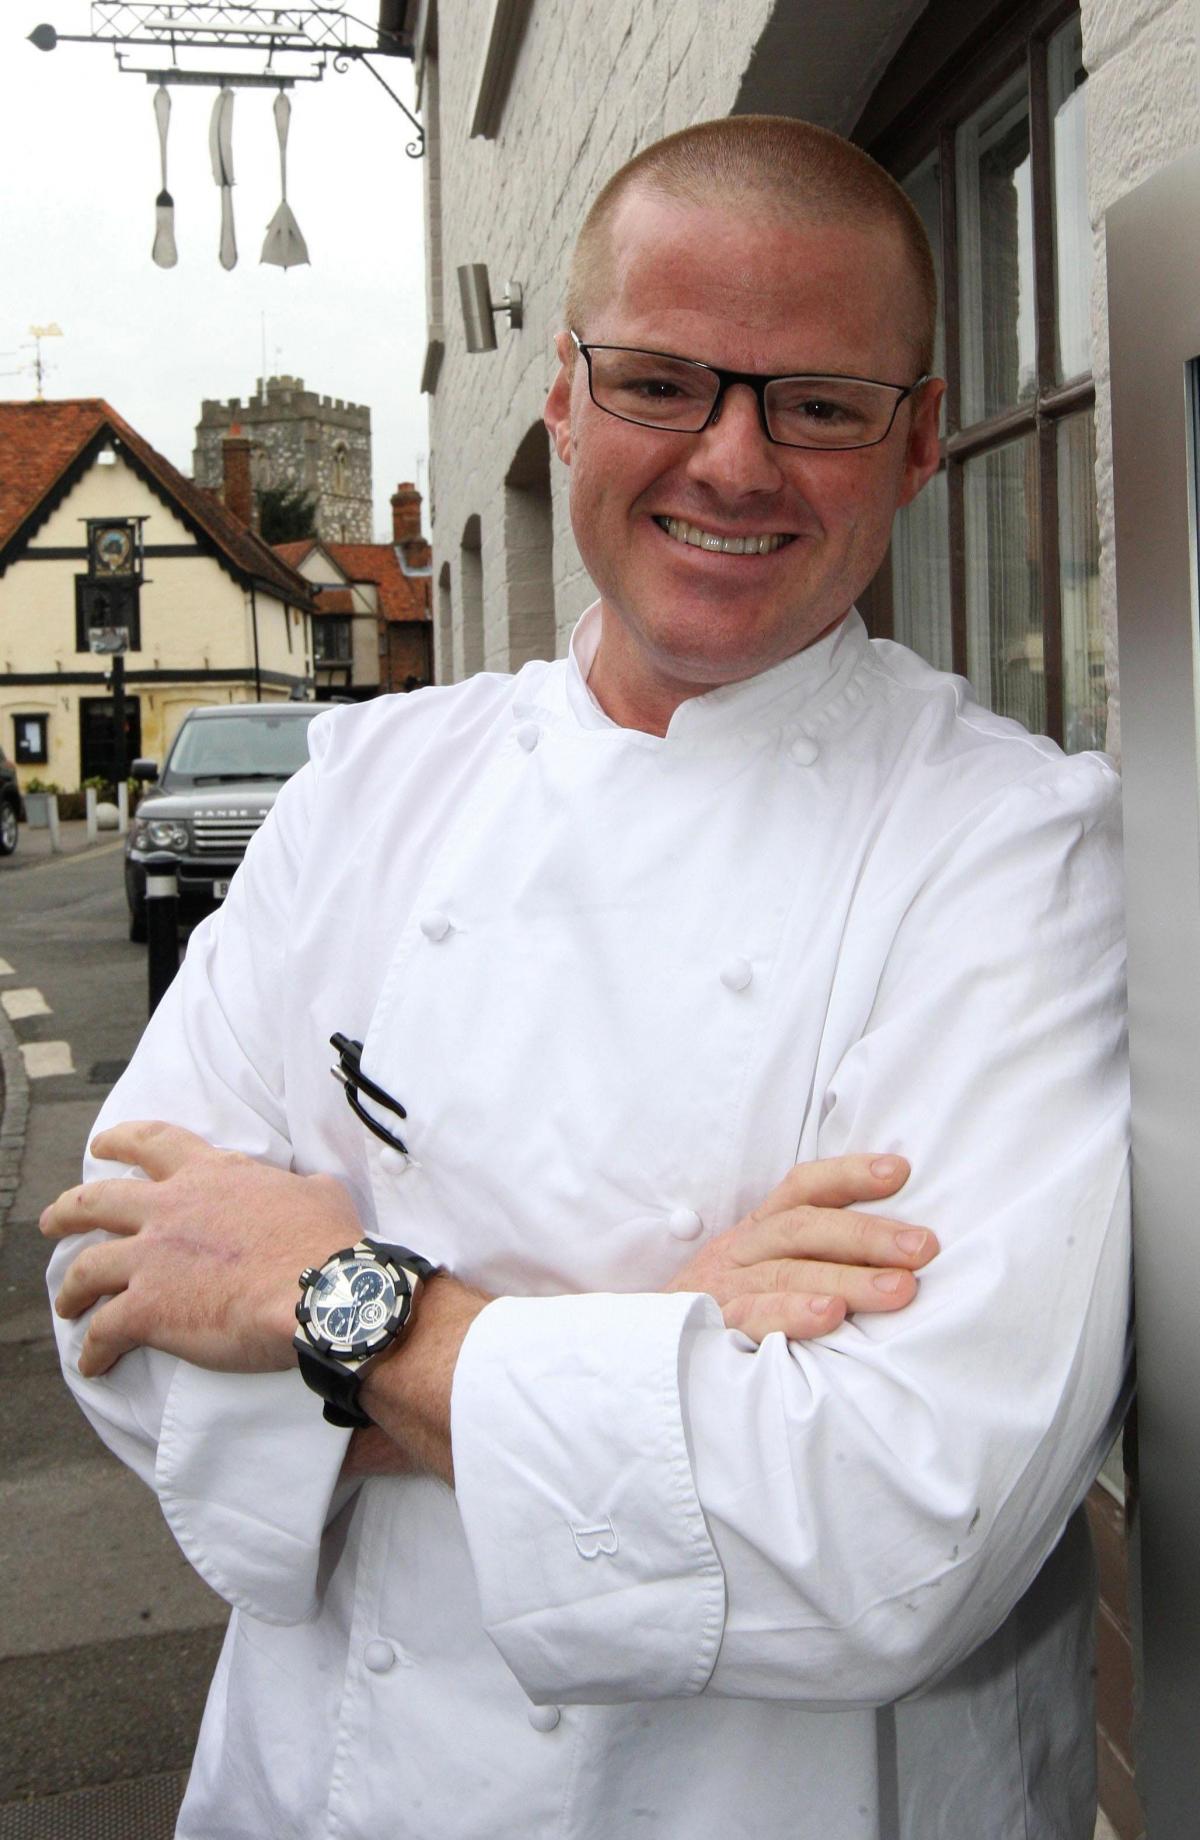 Chef Heston Blumenthal: "I was determined that if I failed, it wouldn't be through lack of effort"